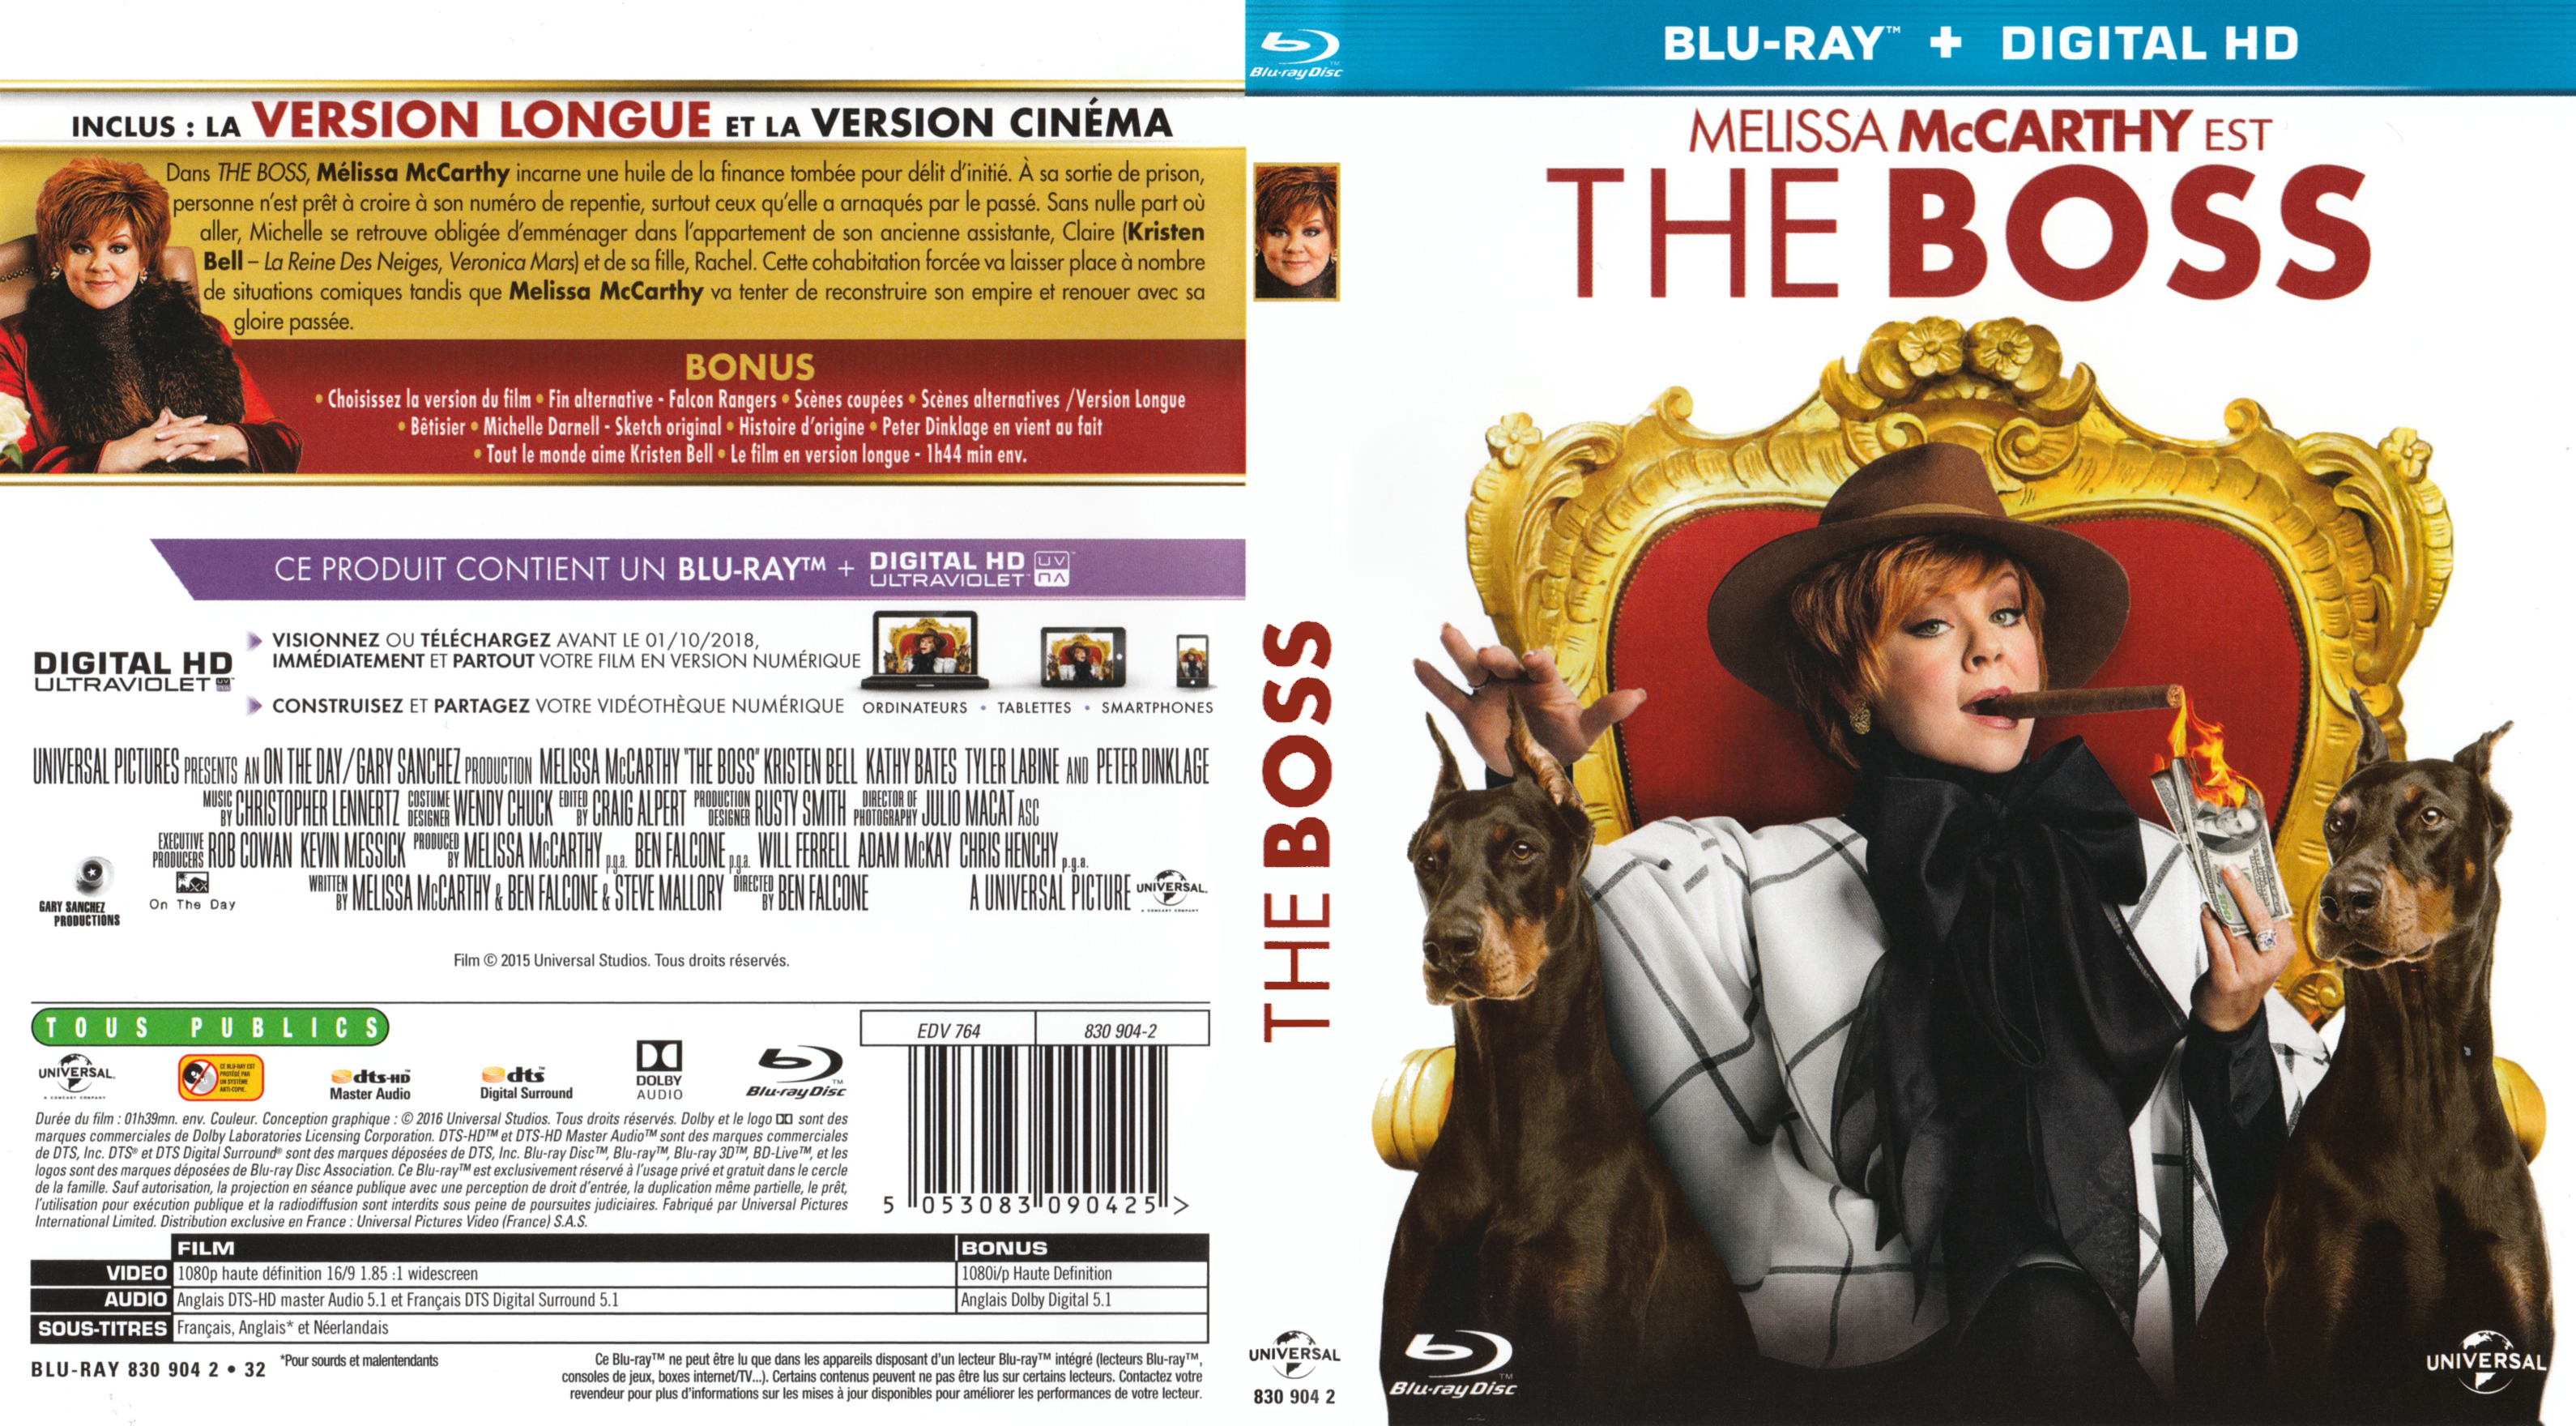 Jaquette DVD The boss (BLU-RAY)